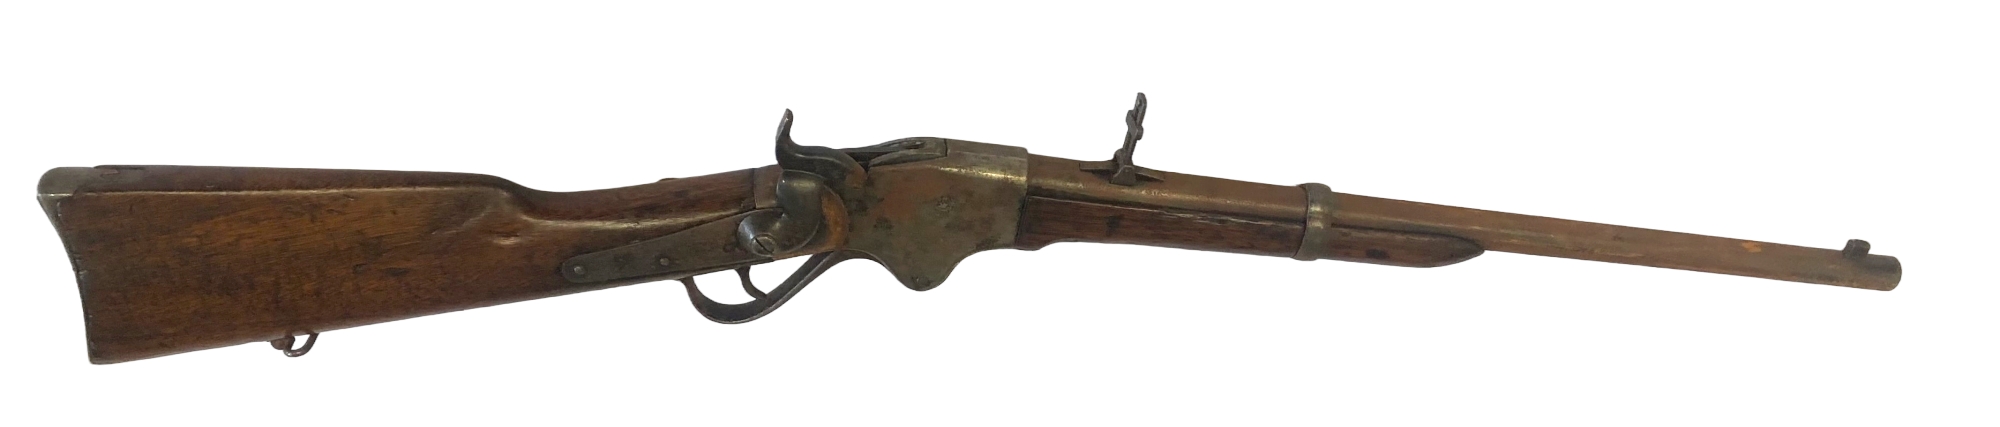 AN AMERICAN CIVIL WAR PERIOD SPENCER LEVER ACTION REPEATING RIFLE. (barrel 47cm, overall 94cm)